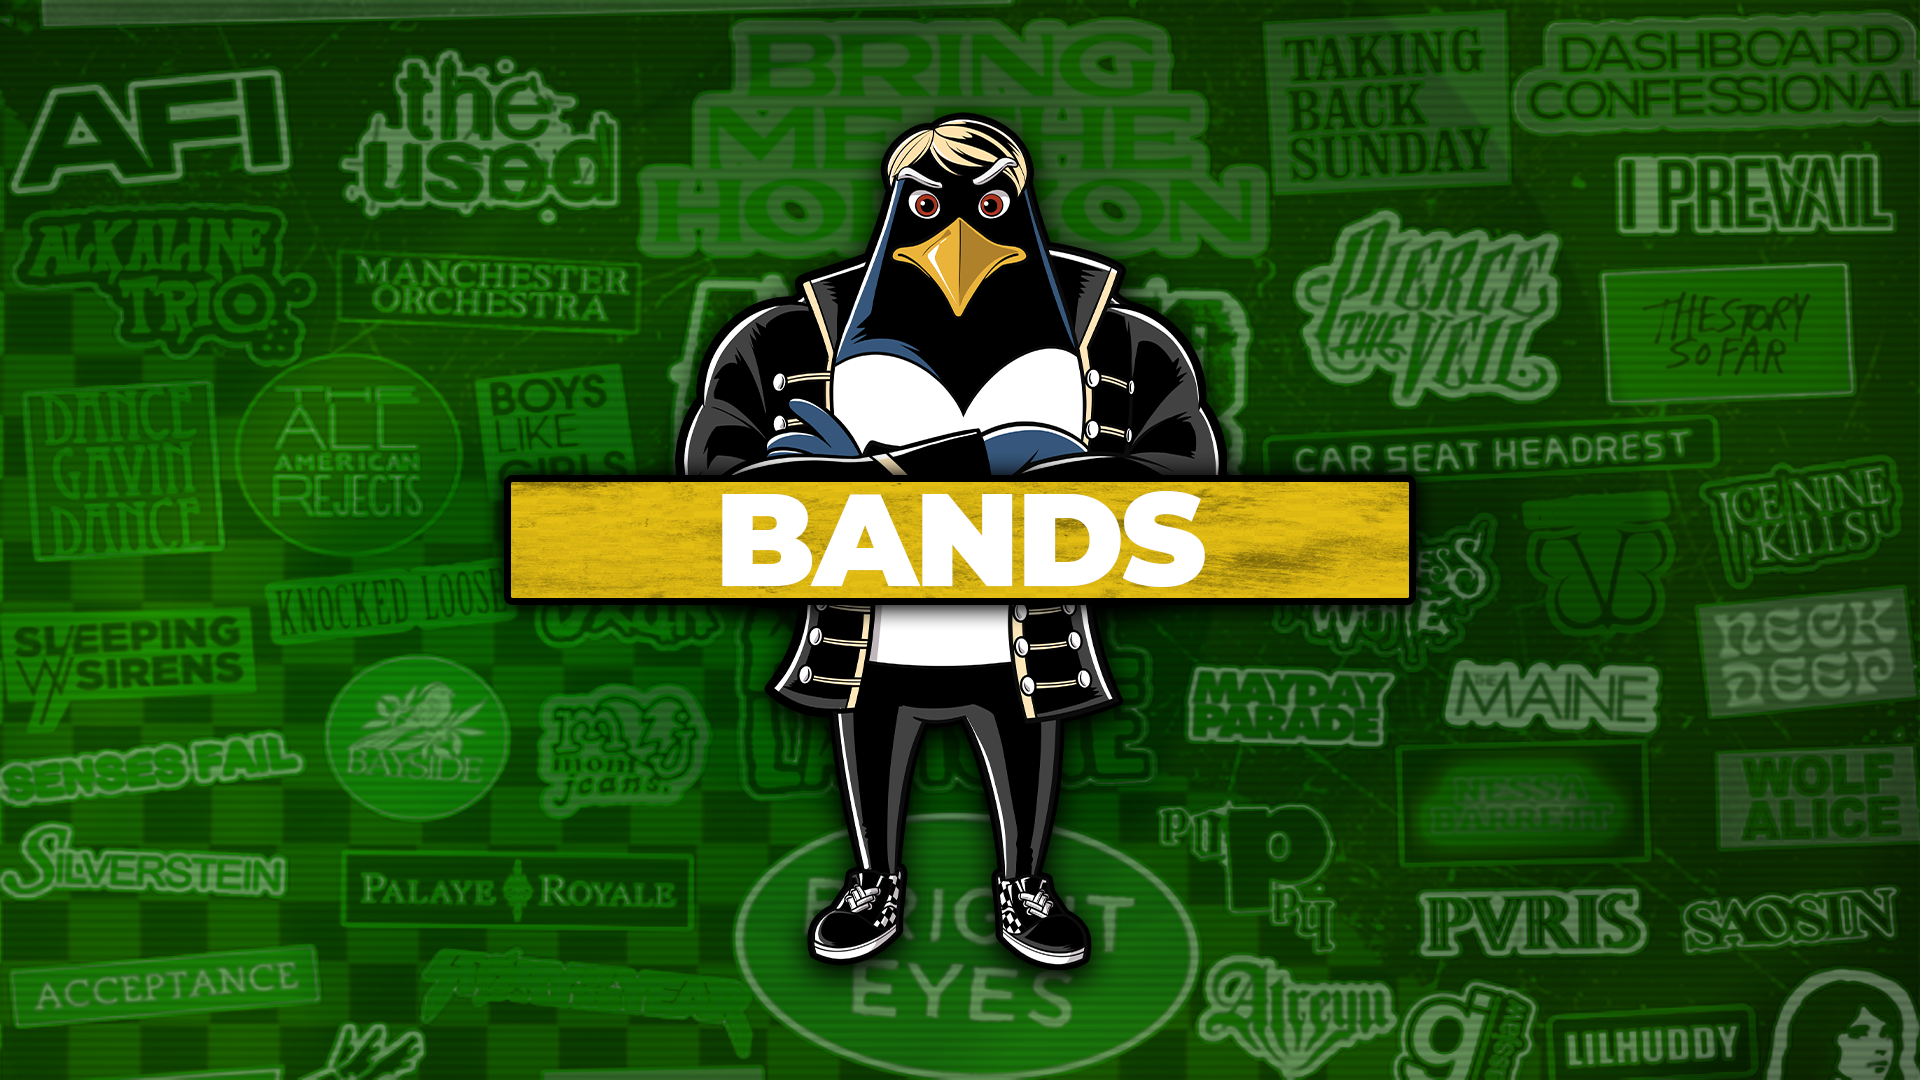 Striking promotional graphic for an Emo Night featuring 'BANDS', with a bold yellow banner across a green neon backdrop filled with names of popular emo and punk bands like AFI, The Used, and Bring Me The Horizon. A cartoon penguin dressed in punk attire stands in the center, symbolizing the music theme of the event.